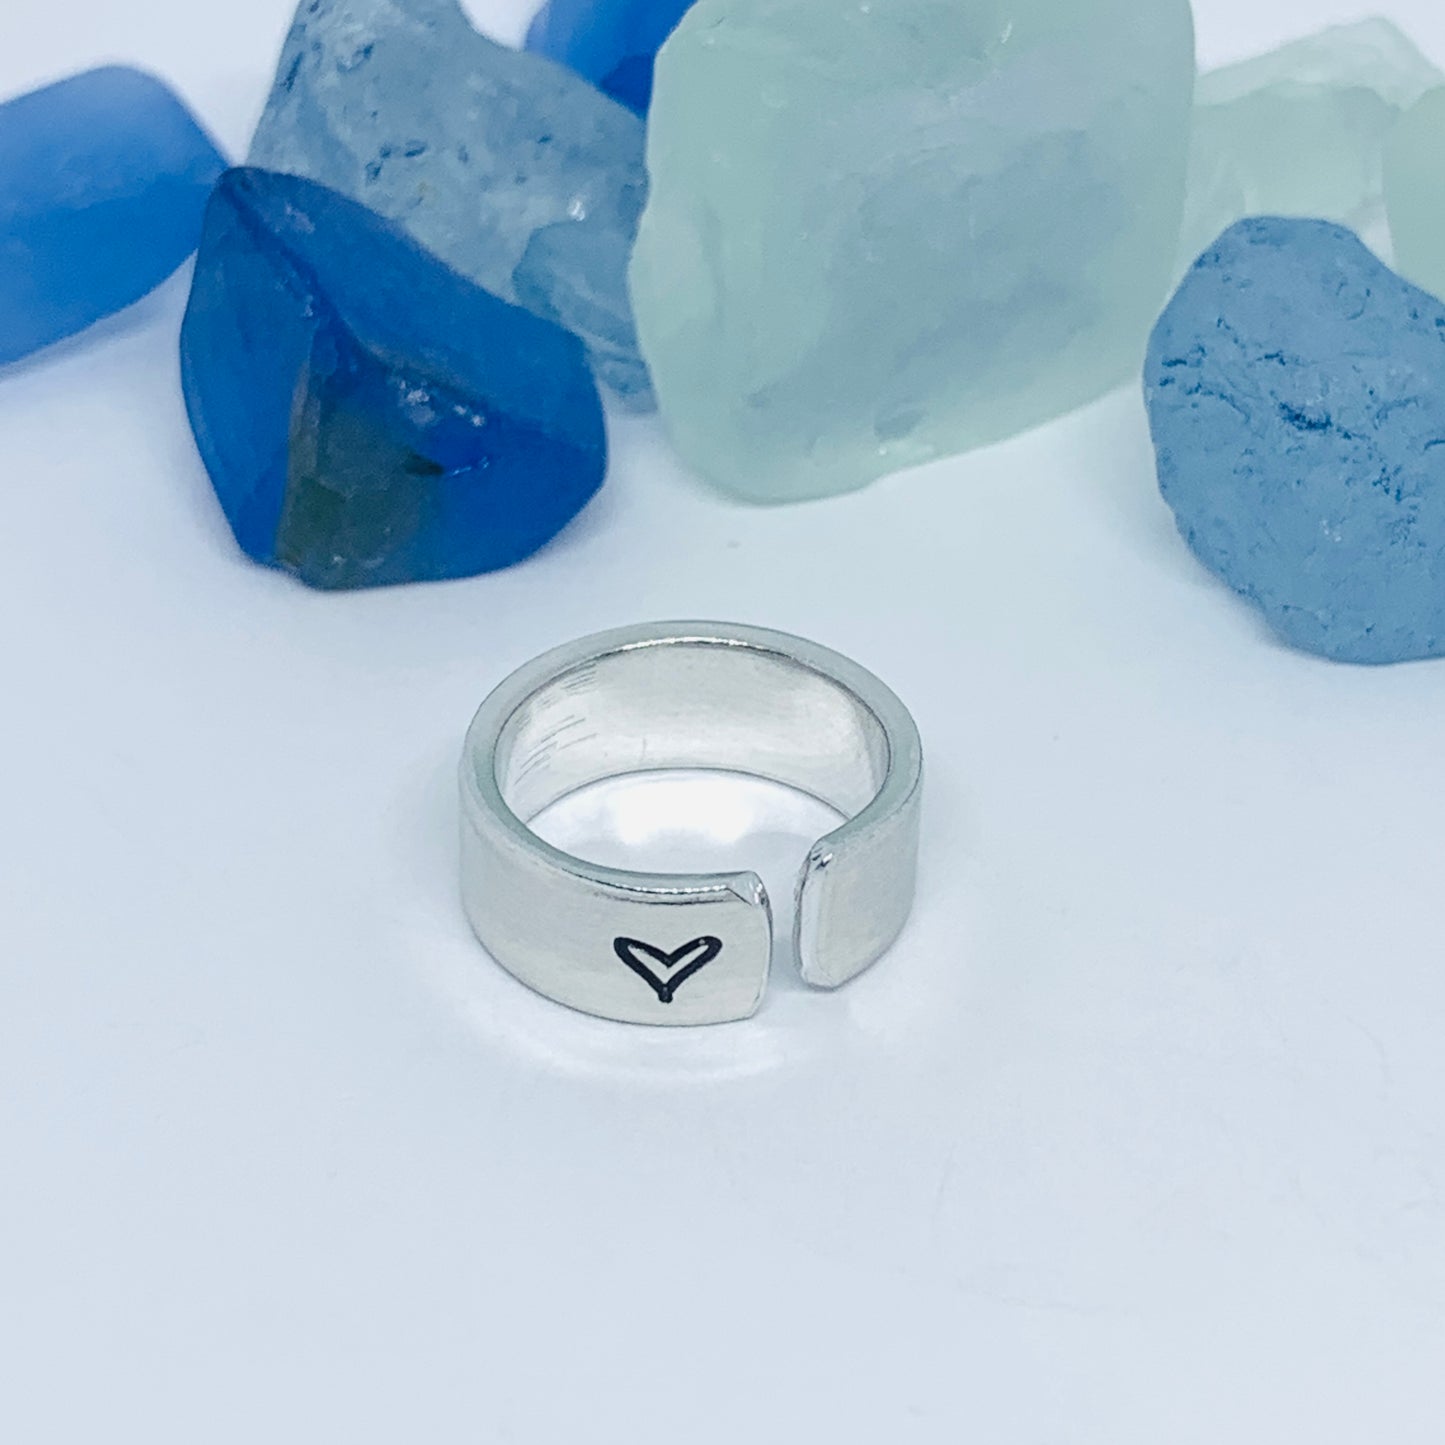 LOVE Hand Stamped Ring | Trans L⚧VE Ring | Stamped Metal Stacking Ring | Adjustable Ring | Gift for Them Him Her